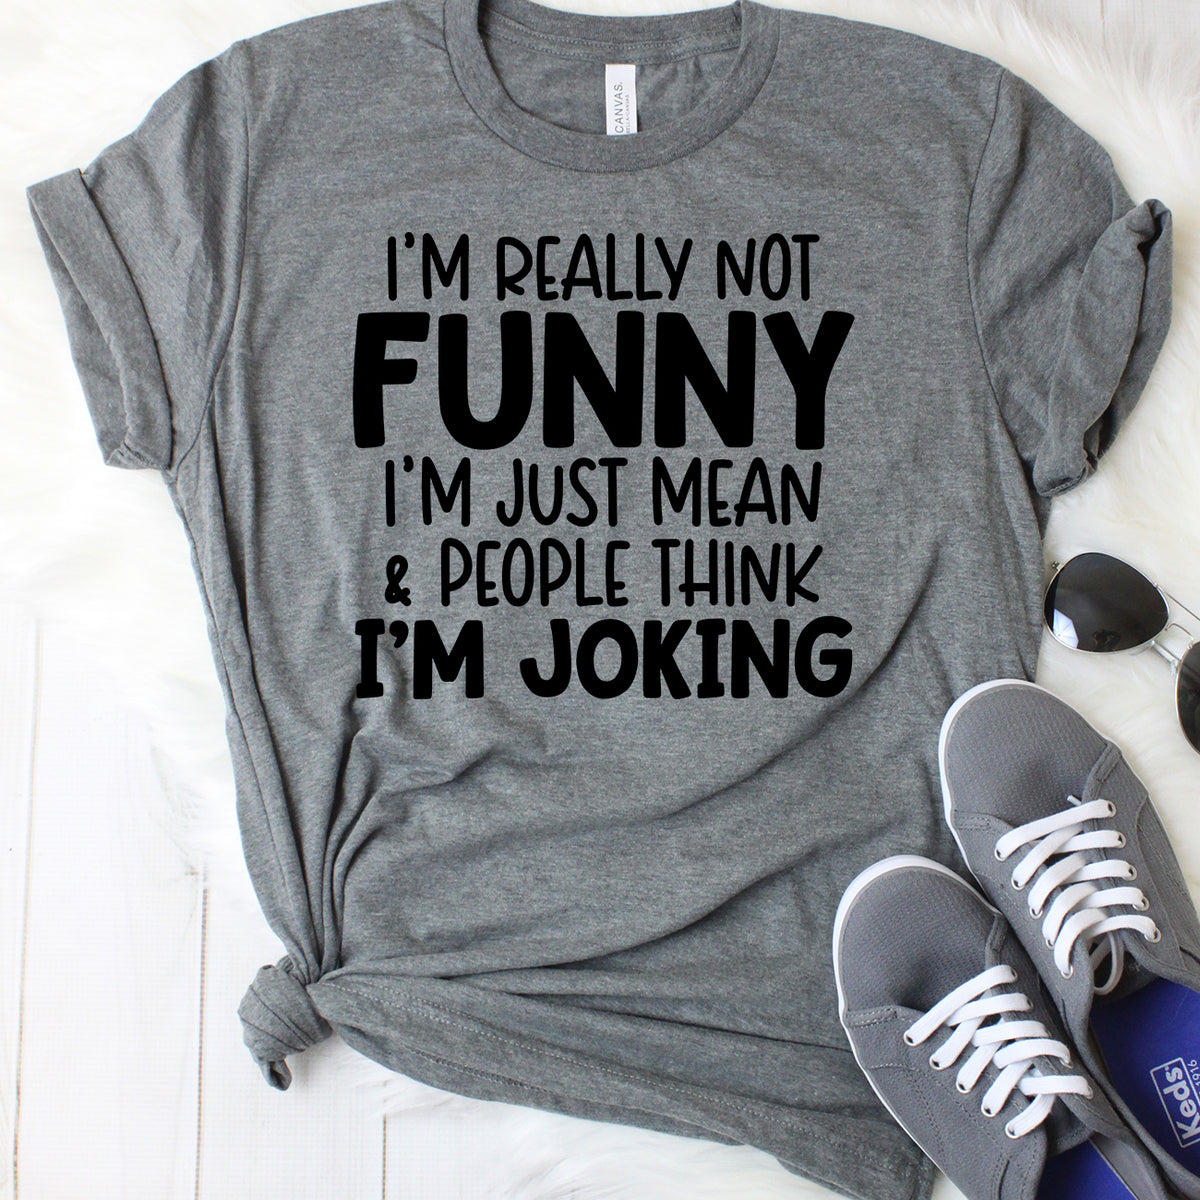 I'm Really Not Funny I'm Just Mean & People Think I'm Joking Dark Grey T-Shirt